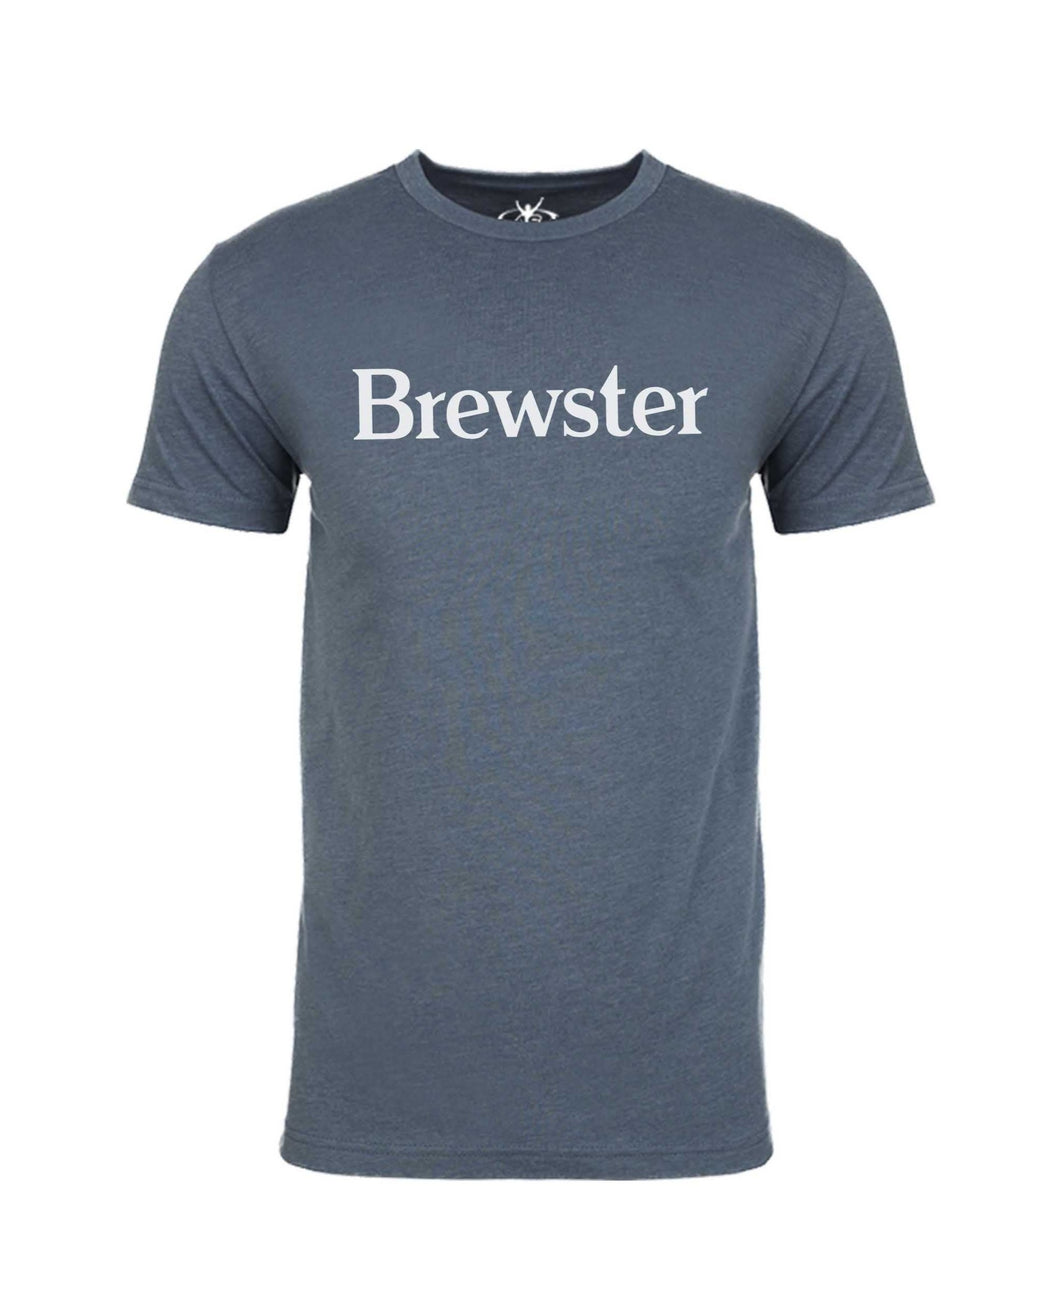 Youth Brewster T-Shirt